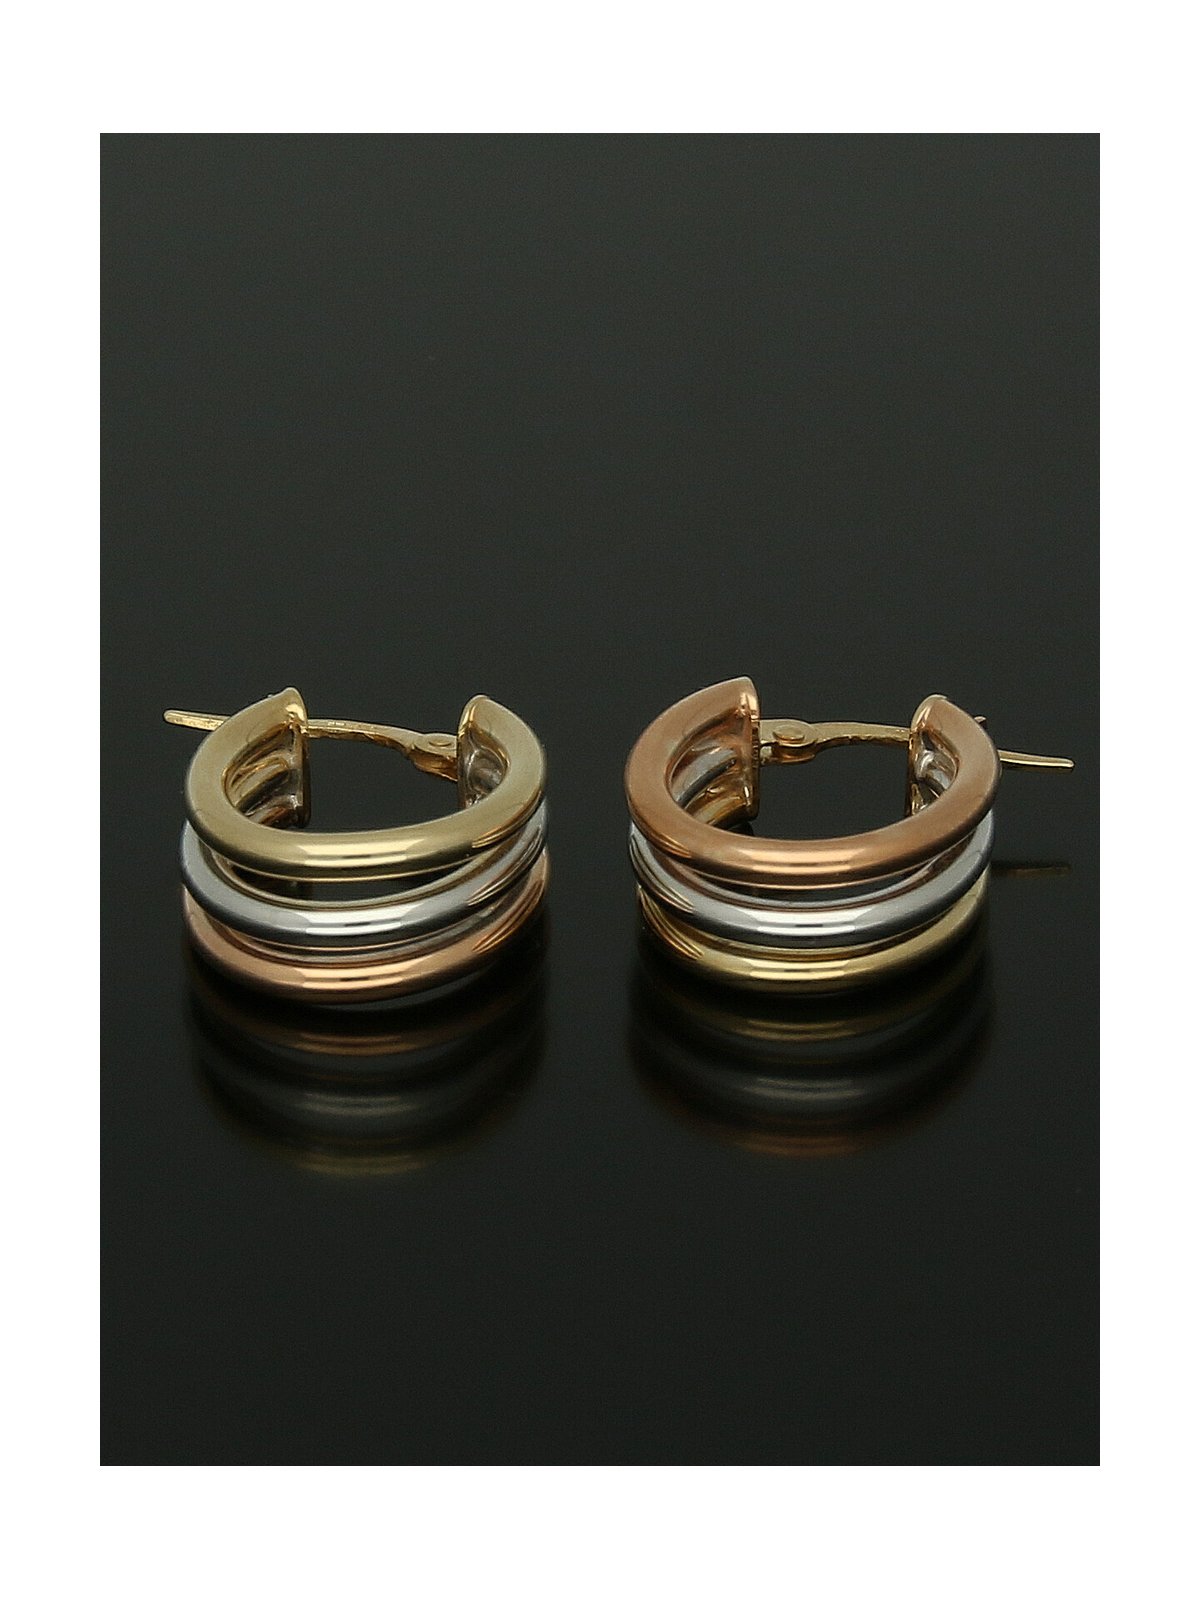 Three Row Oval Hoop Earrings 15x20mm in 9ct Yellow, White & Rose Gold